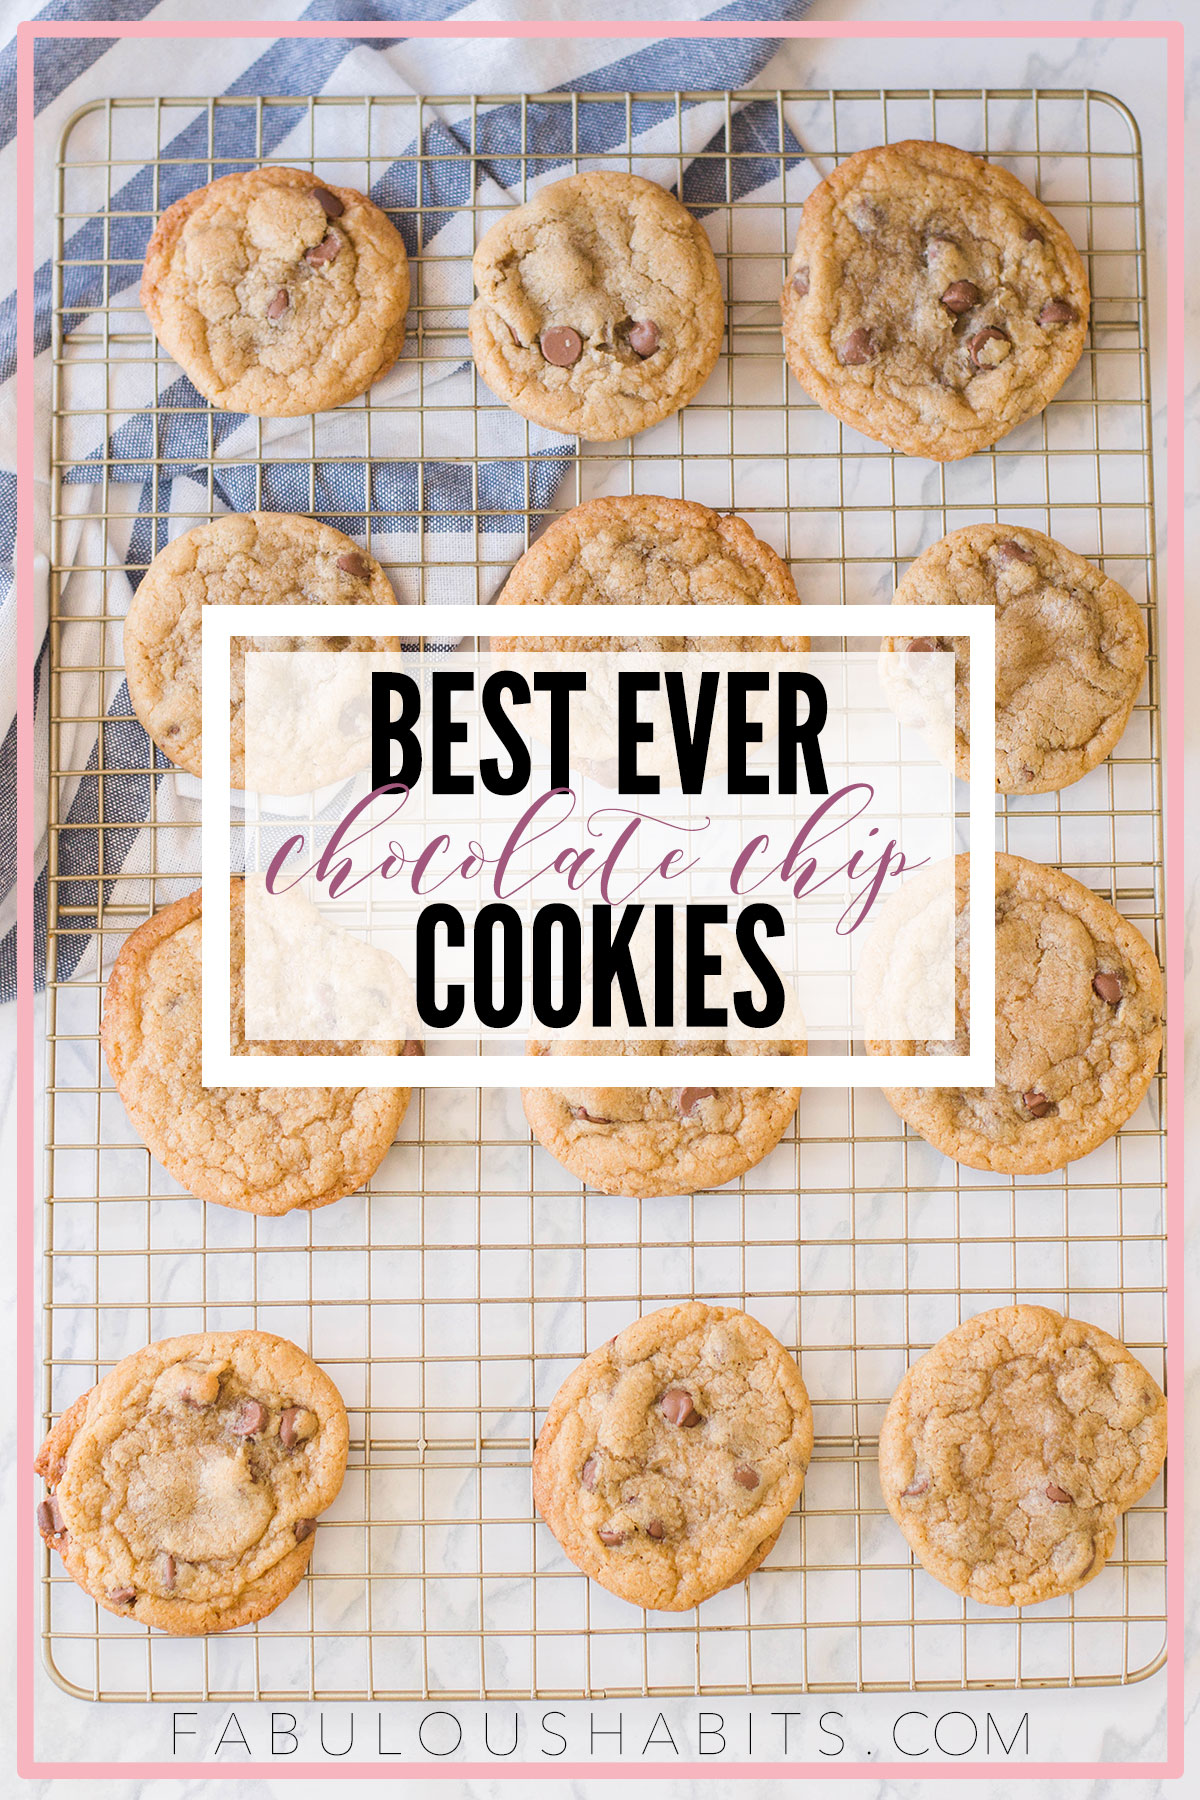 Our Family’s Best Chocolate Chip Cookie Recipe